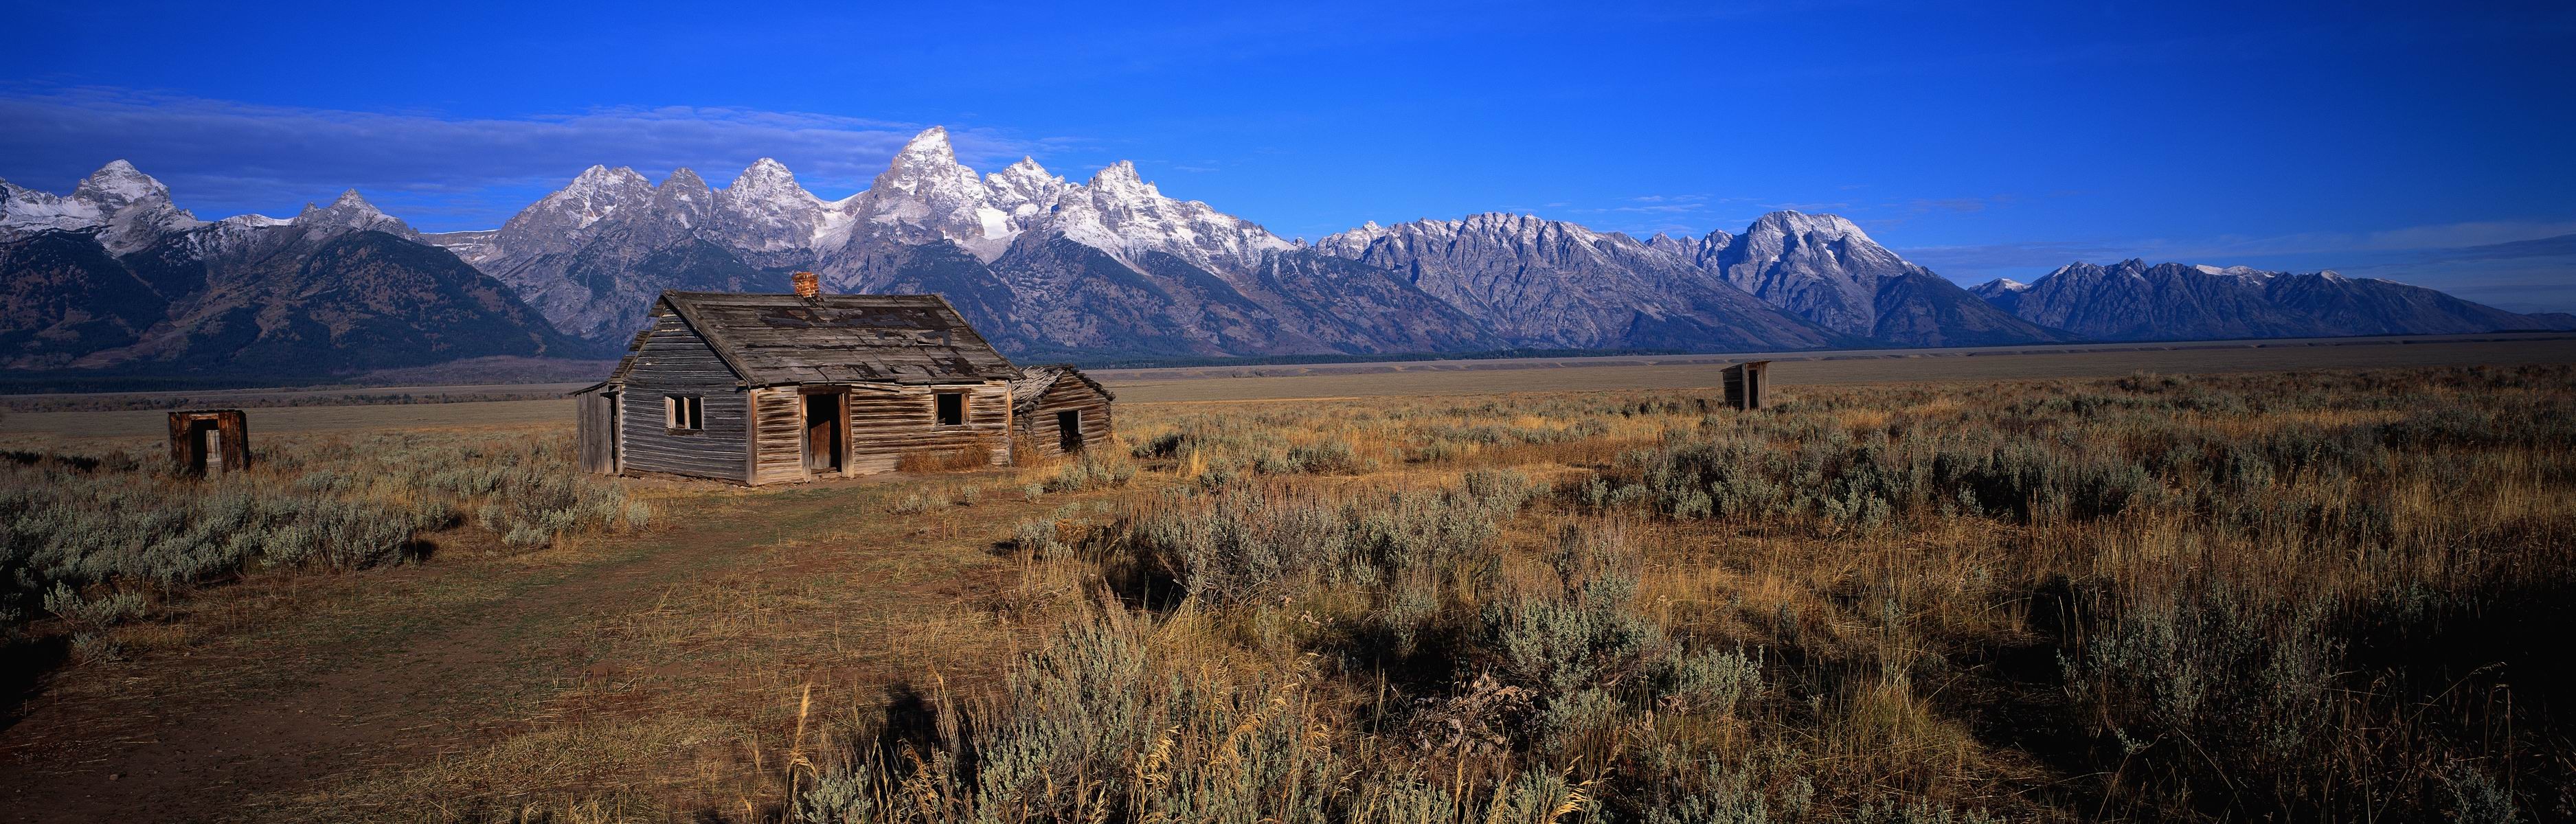 General 3750x1200 landscape dual monitors cabin abandoned mountains plains Grand Teton National Park Wyoming USA ruins mountain pass multiple display